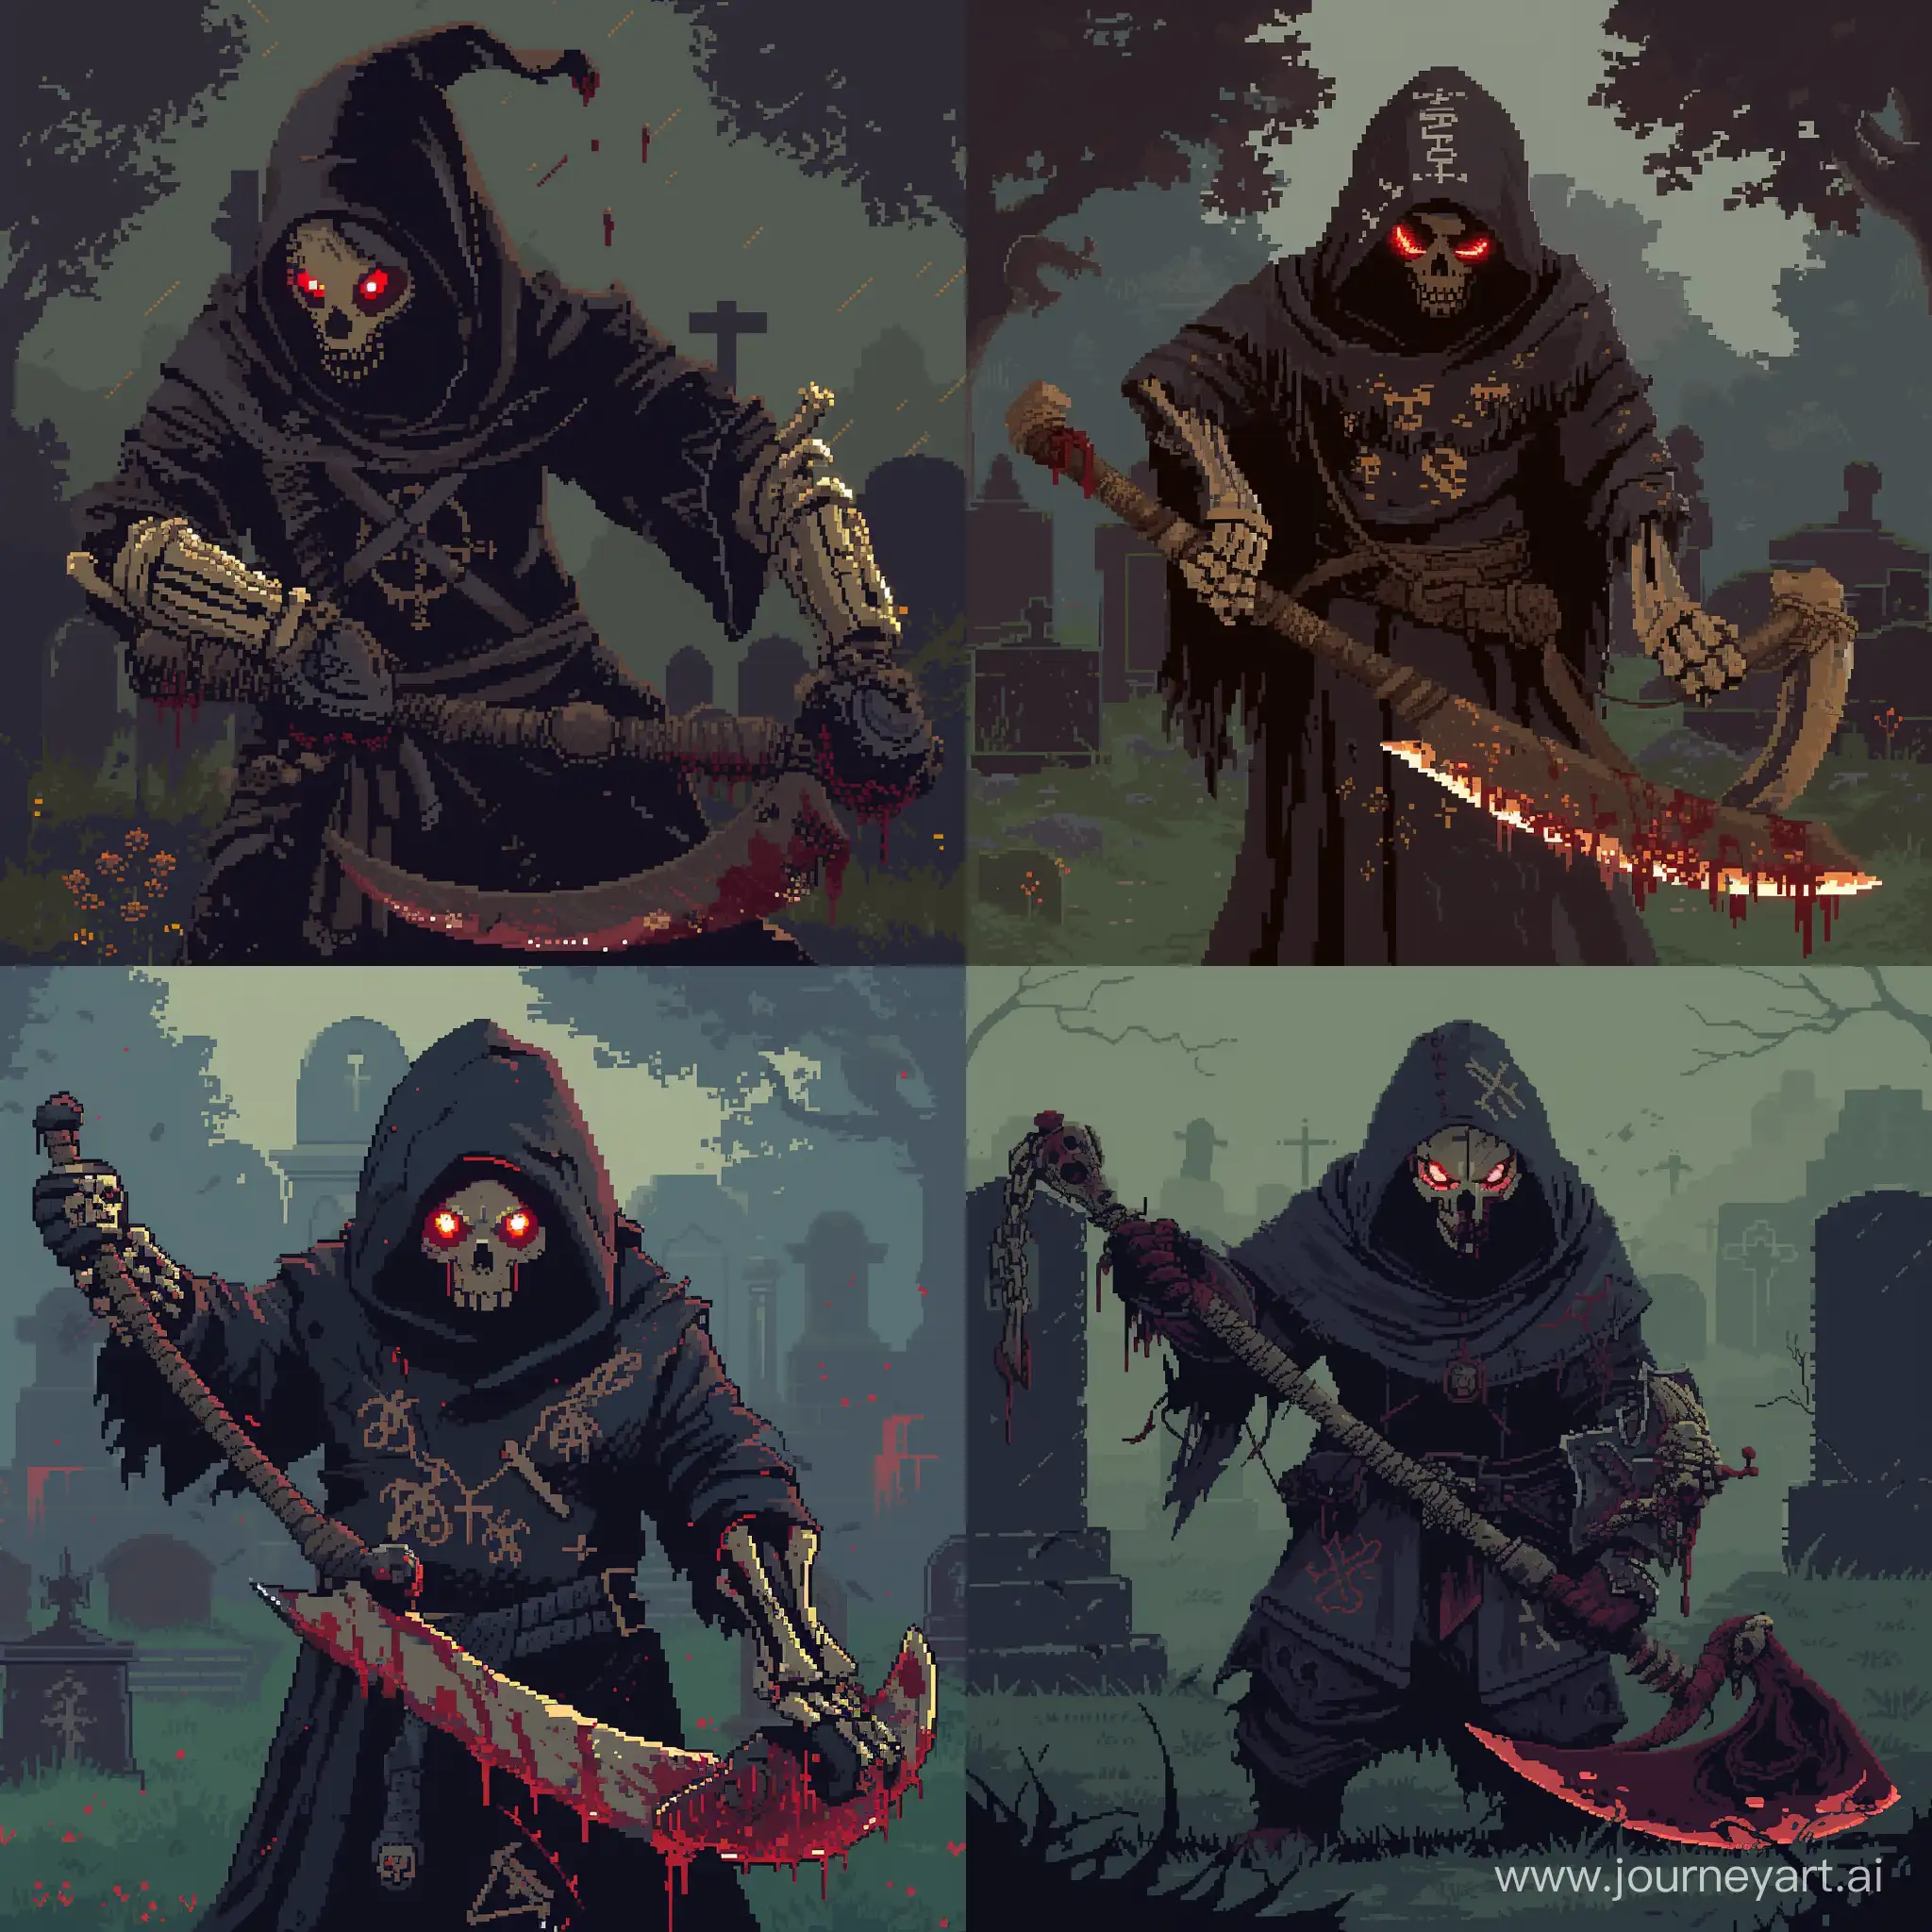 A man wearing a Dark hooded robe adorned with occult symbols Bone gauntlets and greaves Skull mask with glowing red eyes wielding a Weapon, Wicked scythe forged from corrupted bone, in a cemetery, 1990's pixel art, 1970's dark fantasy style, bloodborne style, dark, gritty, edgy, blood on weapon